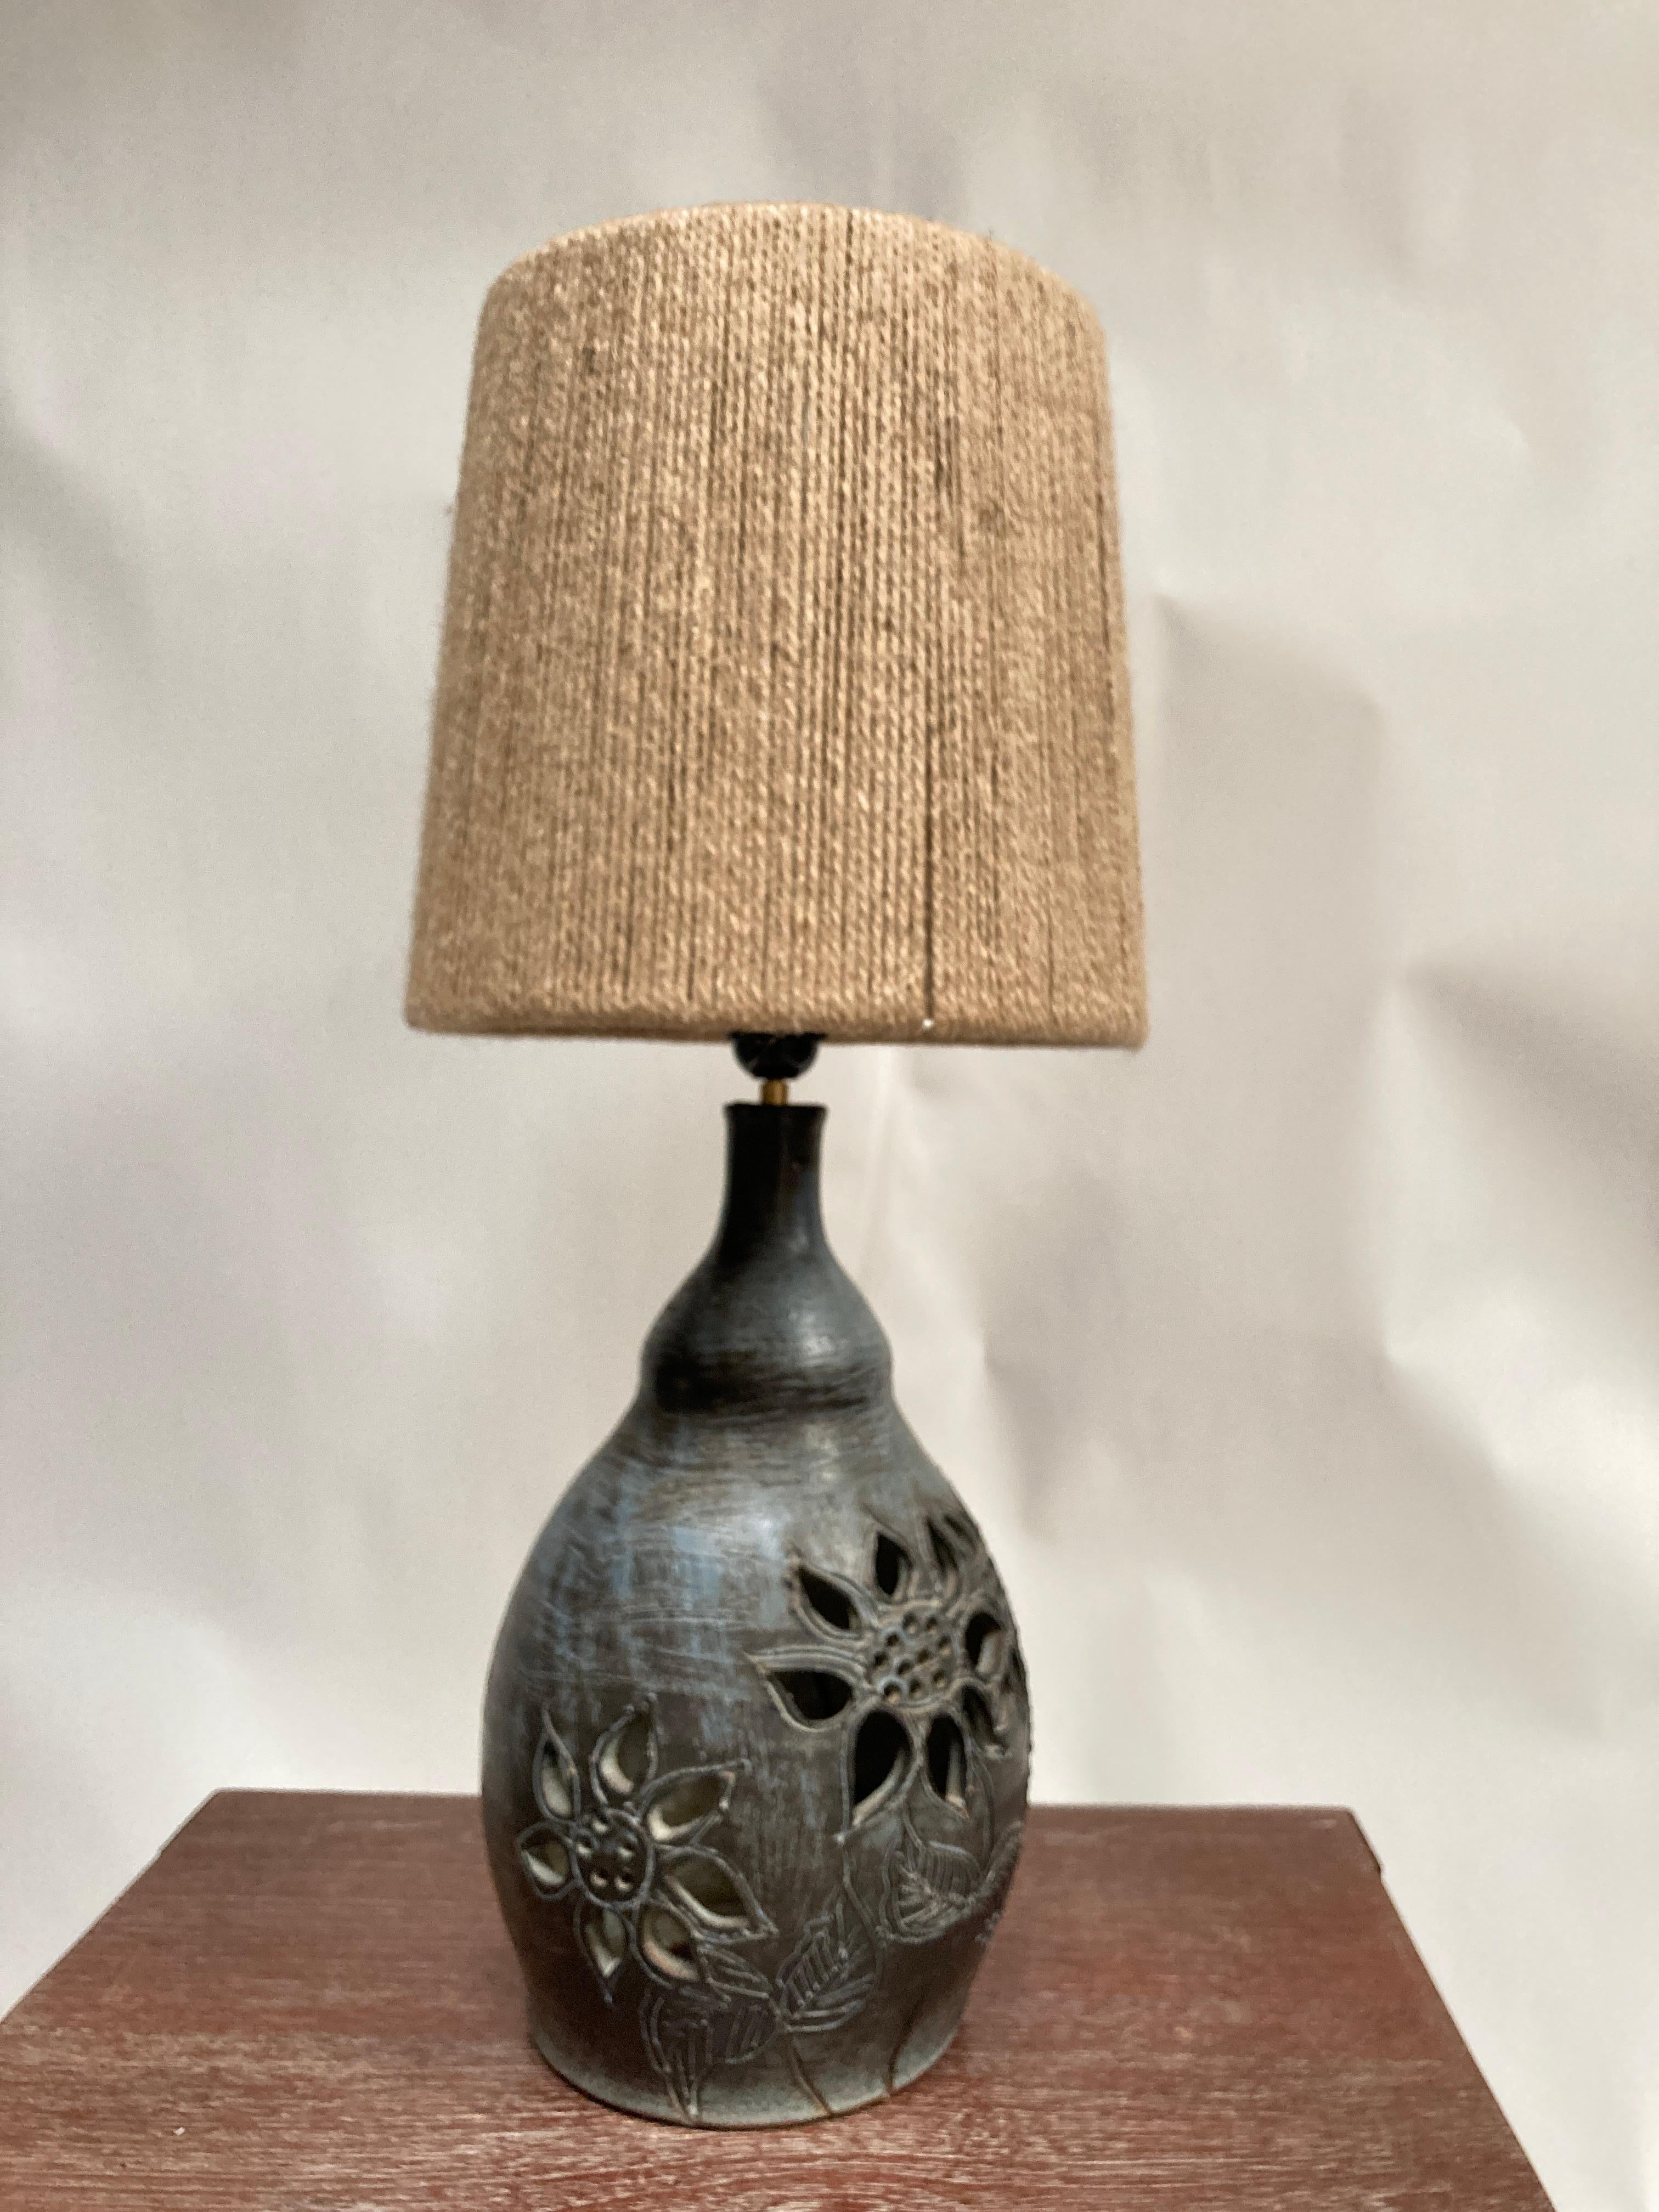 Very nice One of a kind studio pottery ceramic lamp 
Two lights one inside, one outside
Signed , located
Dimensions given without shade
No shade included